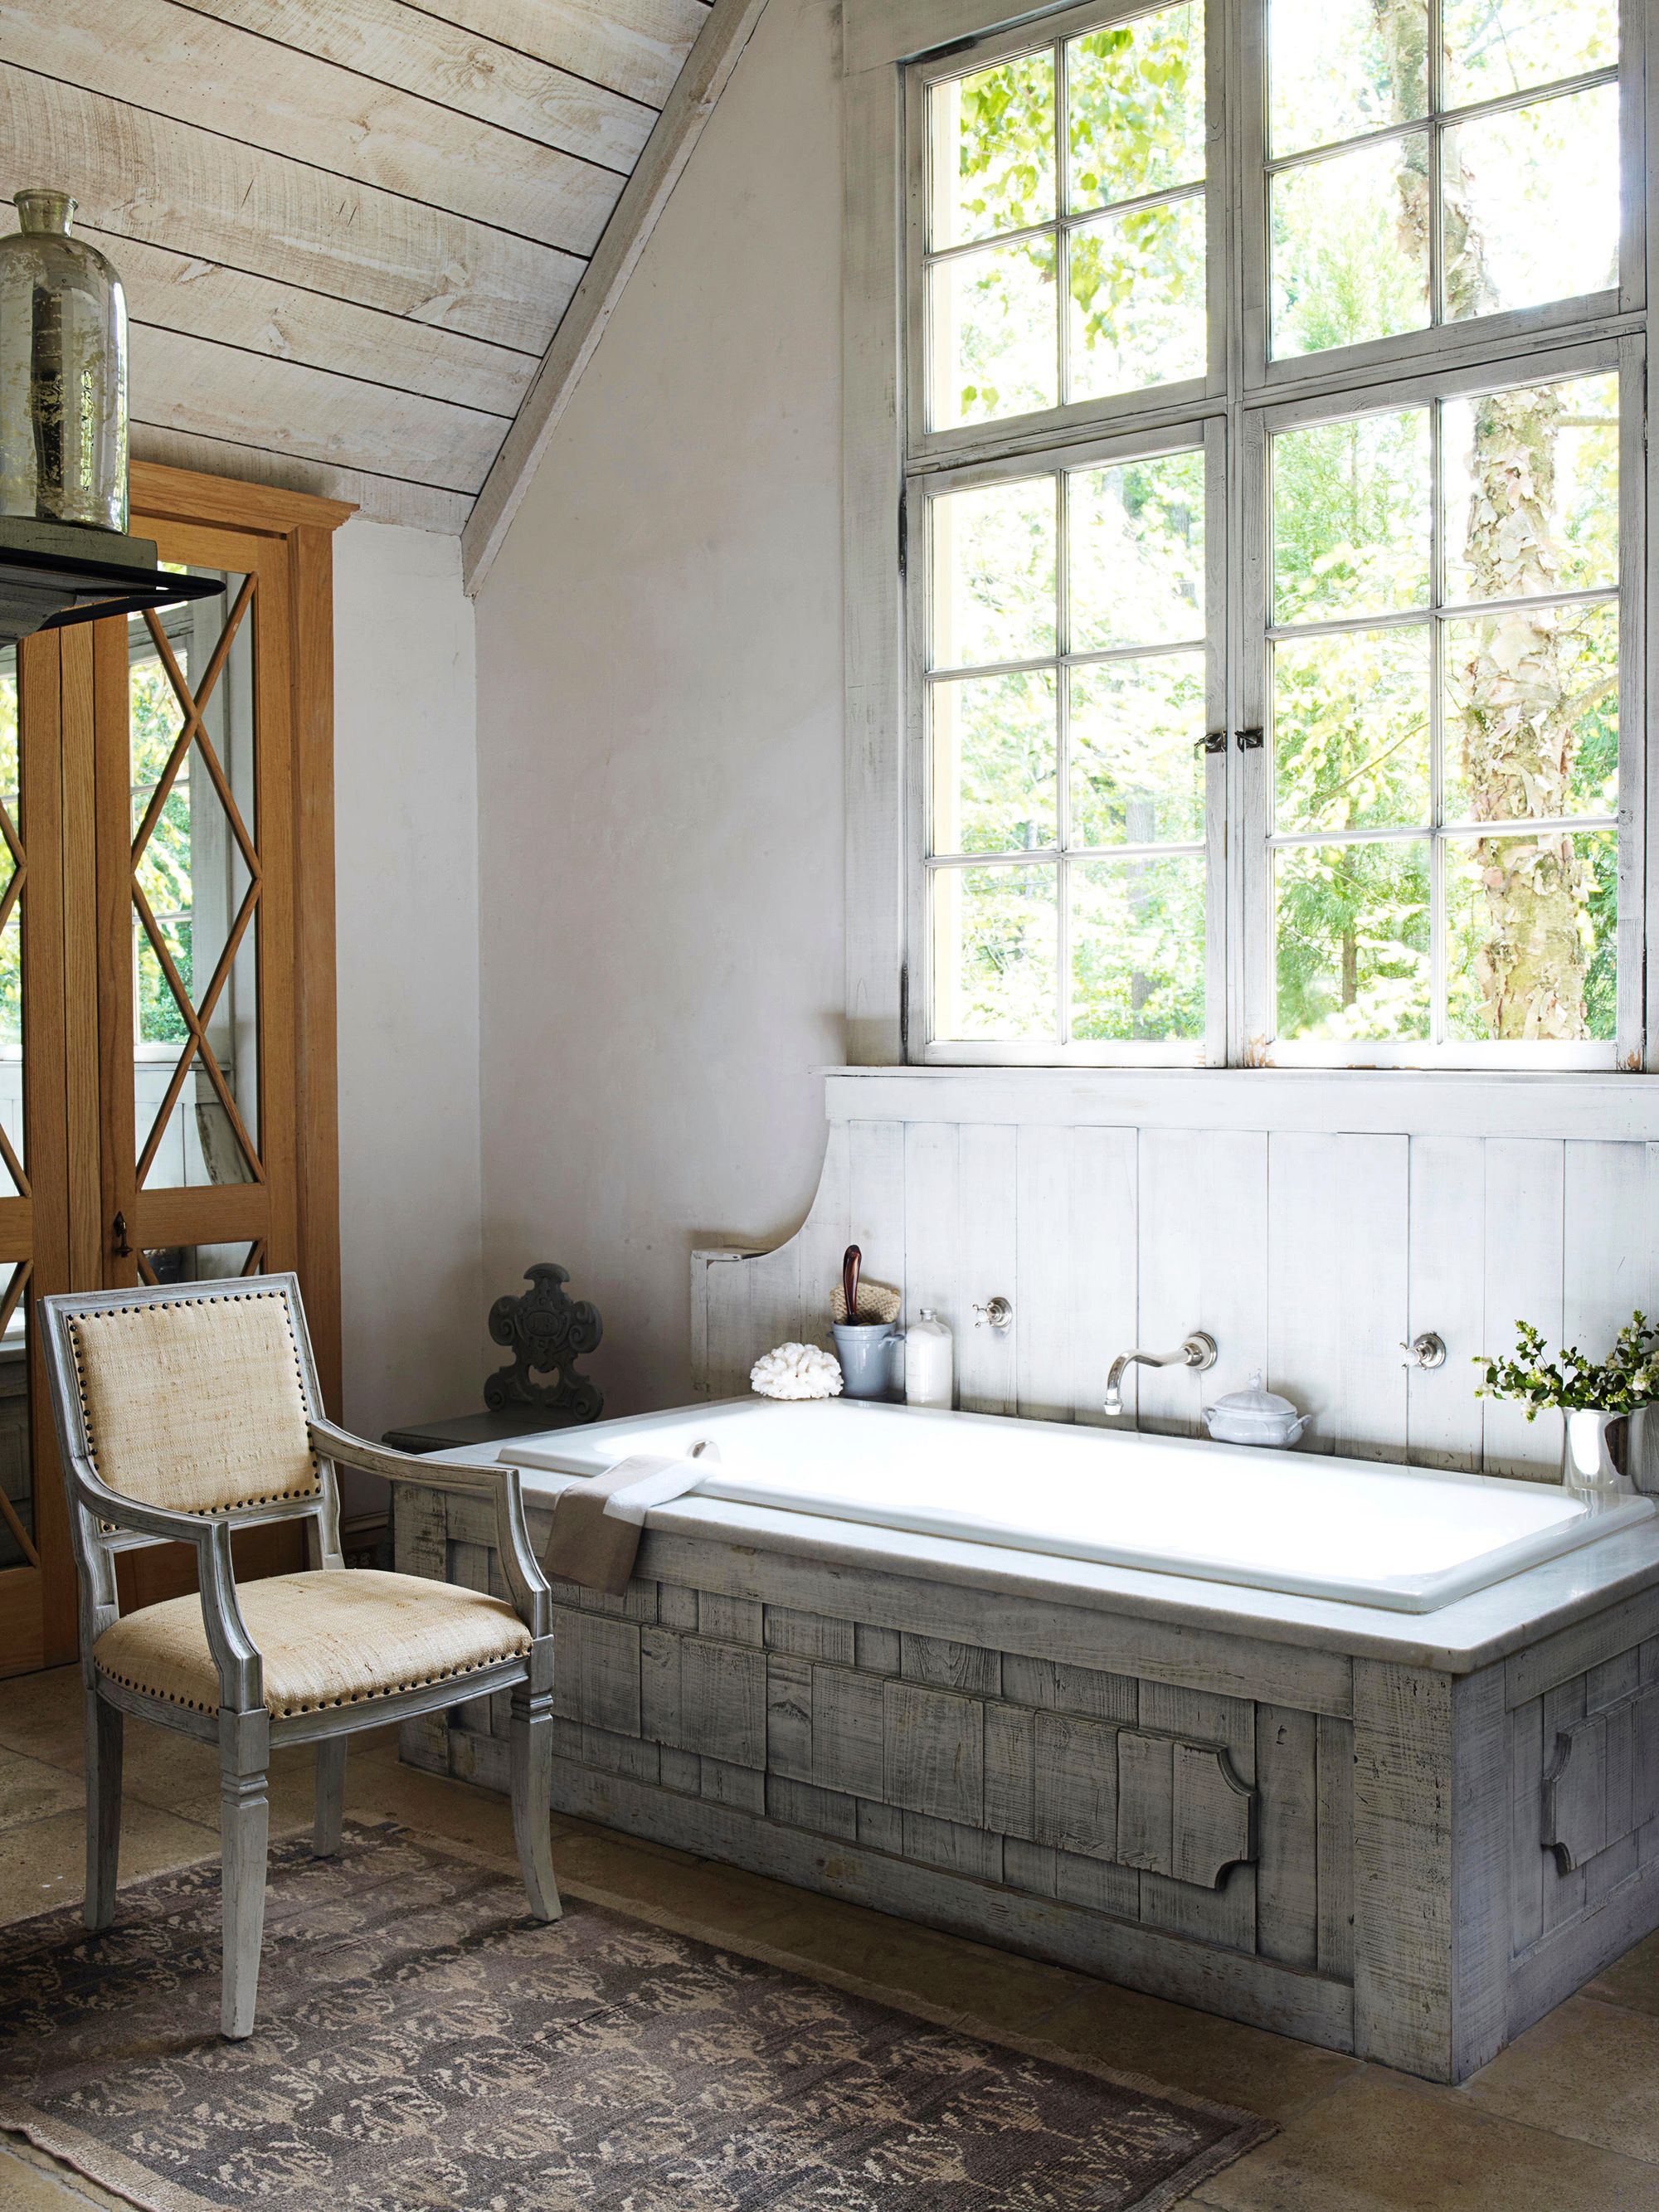 Our Top 5 Primary Bath Must-Haves